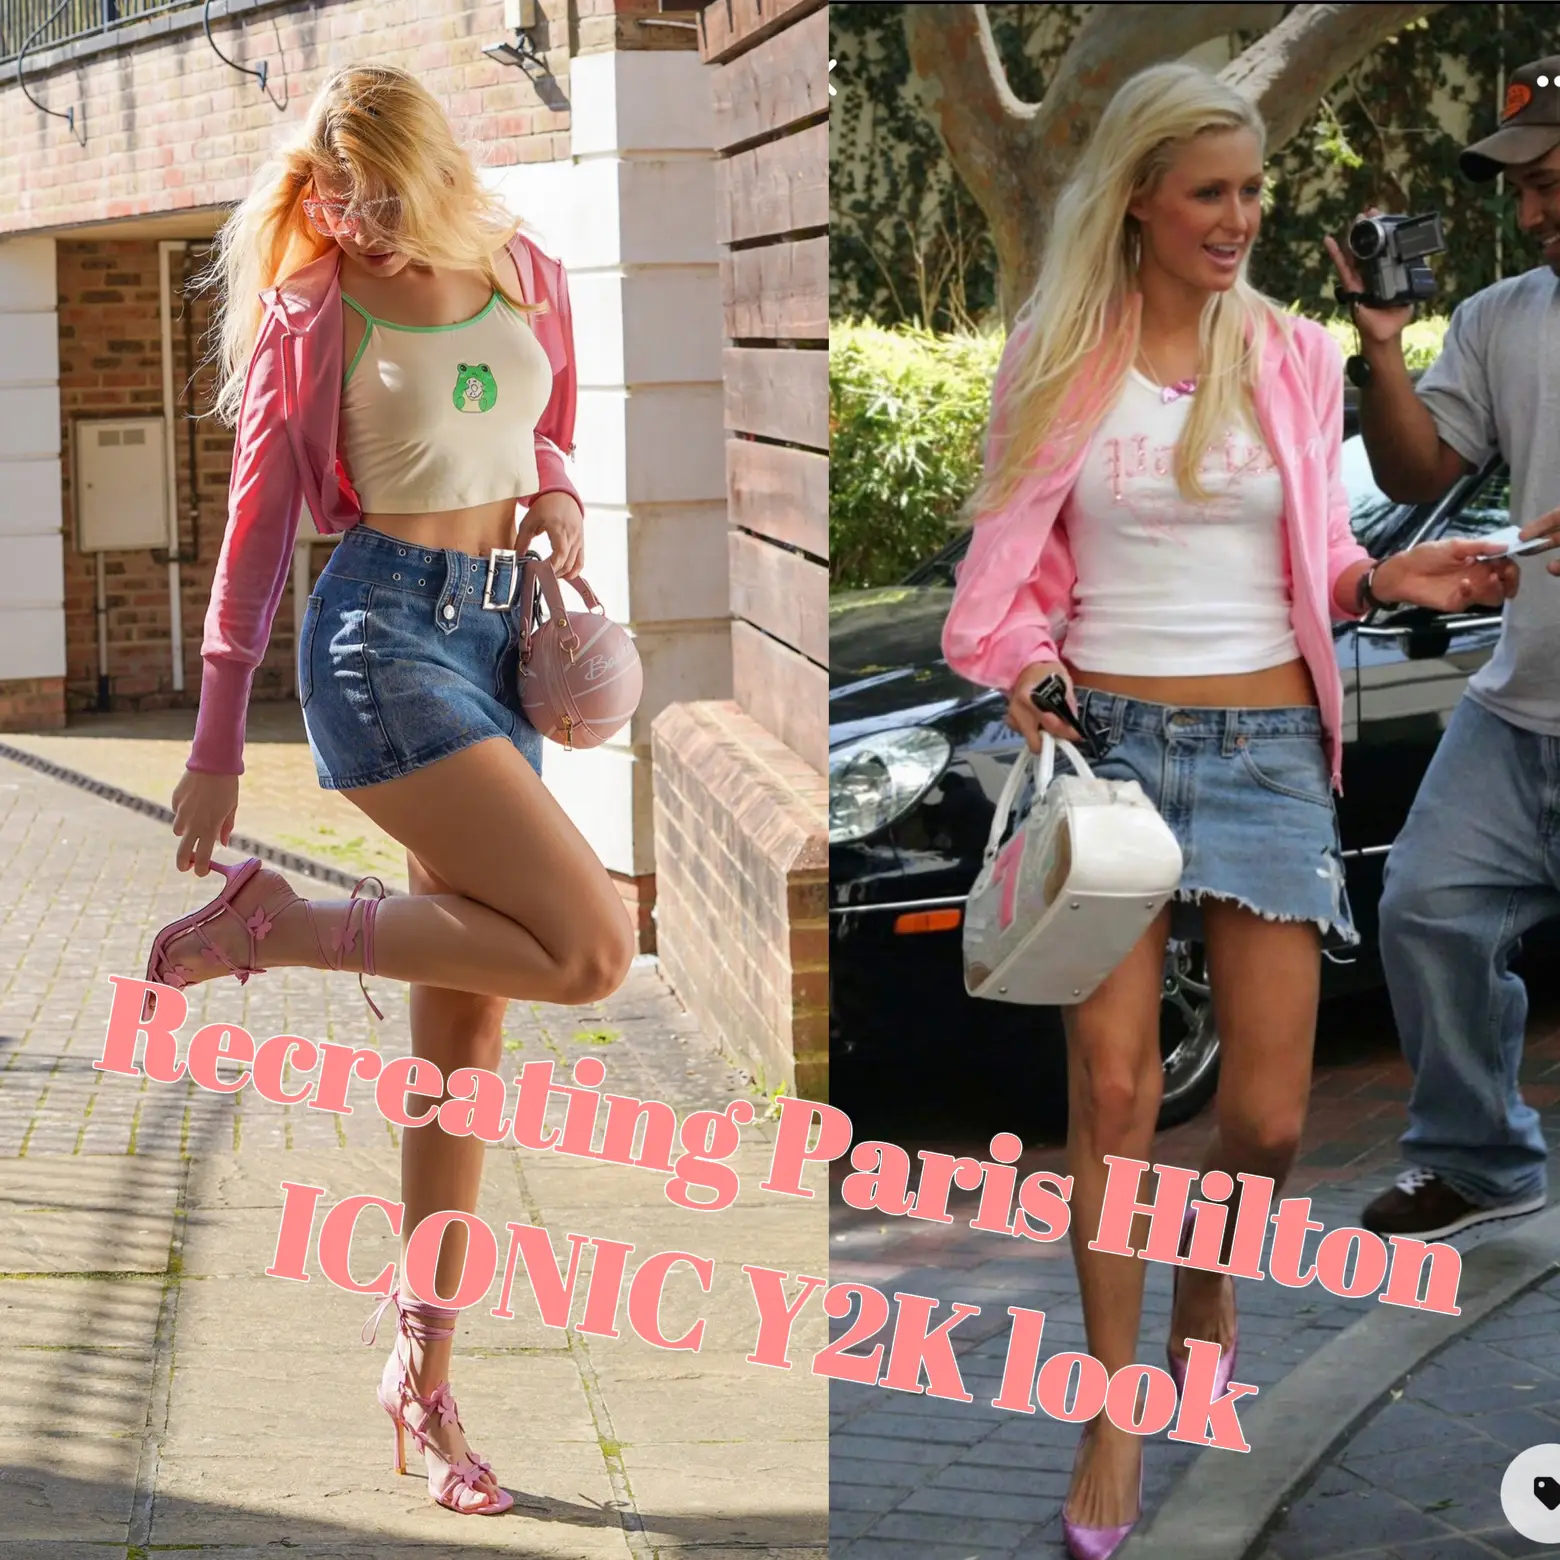 Embrace Paris Hilton's Iconic Aesthetic with These 7 Outfits